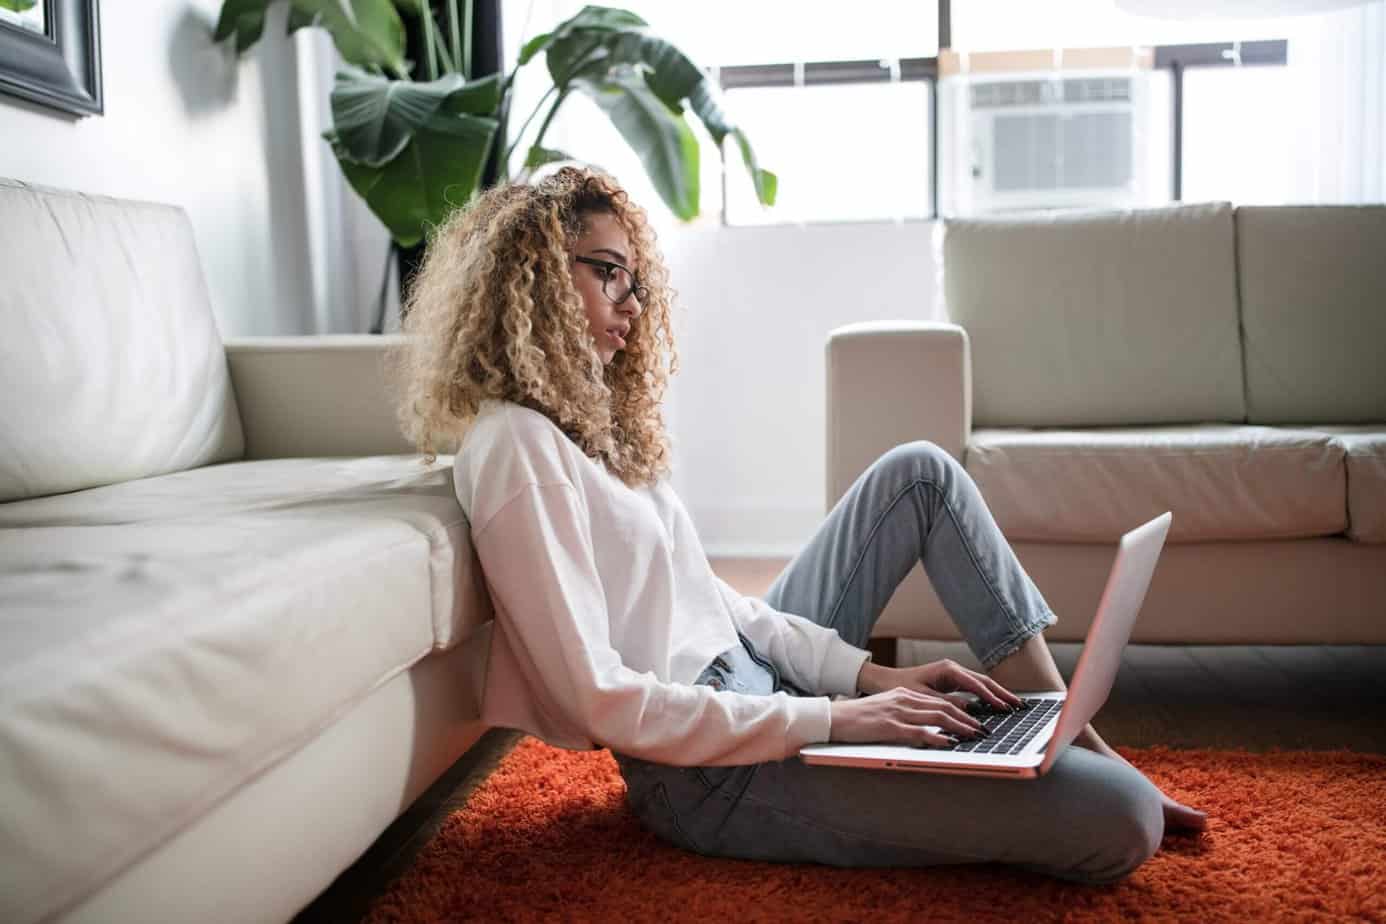 A woman of color with curly blonde hair, using a laptop in her living room.